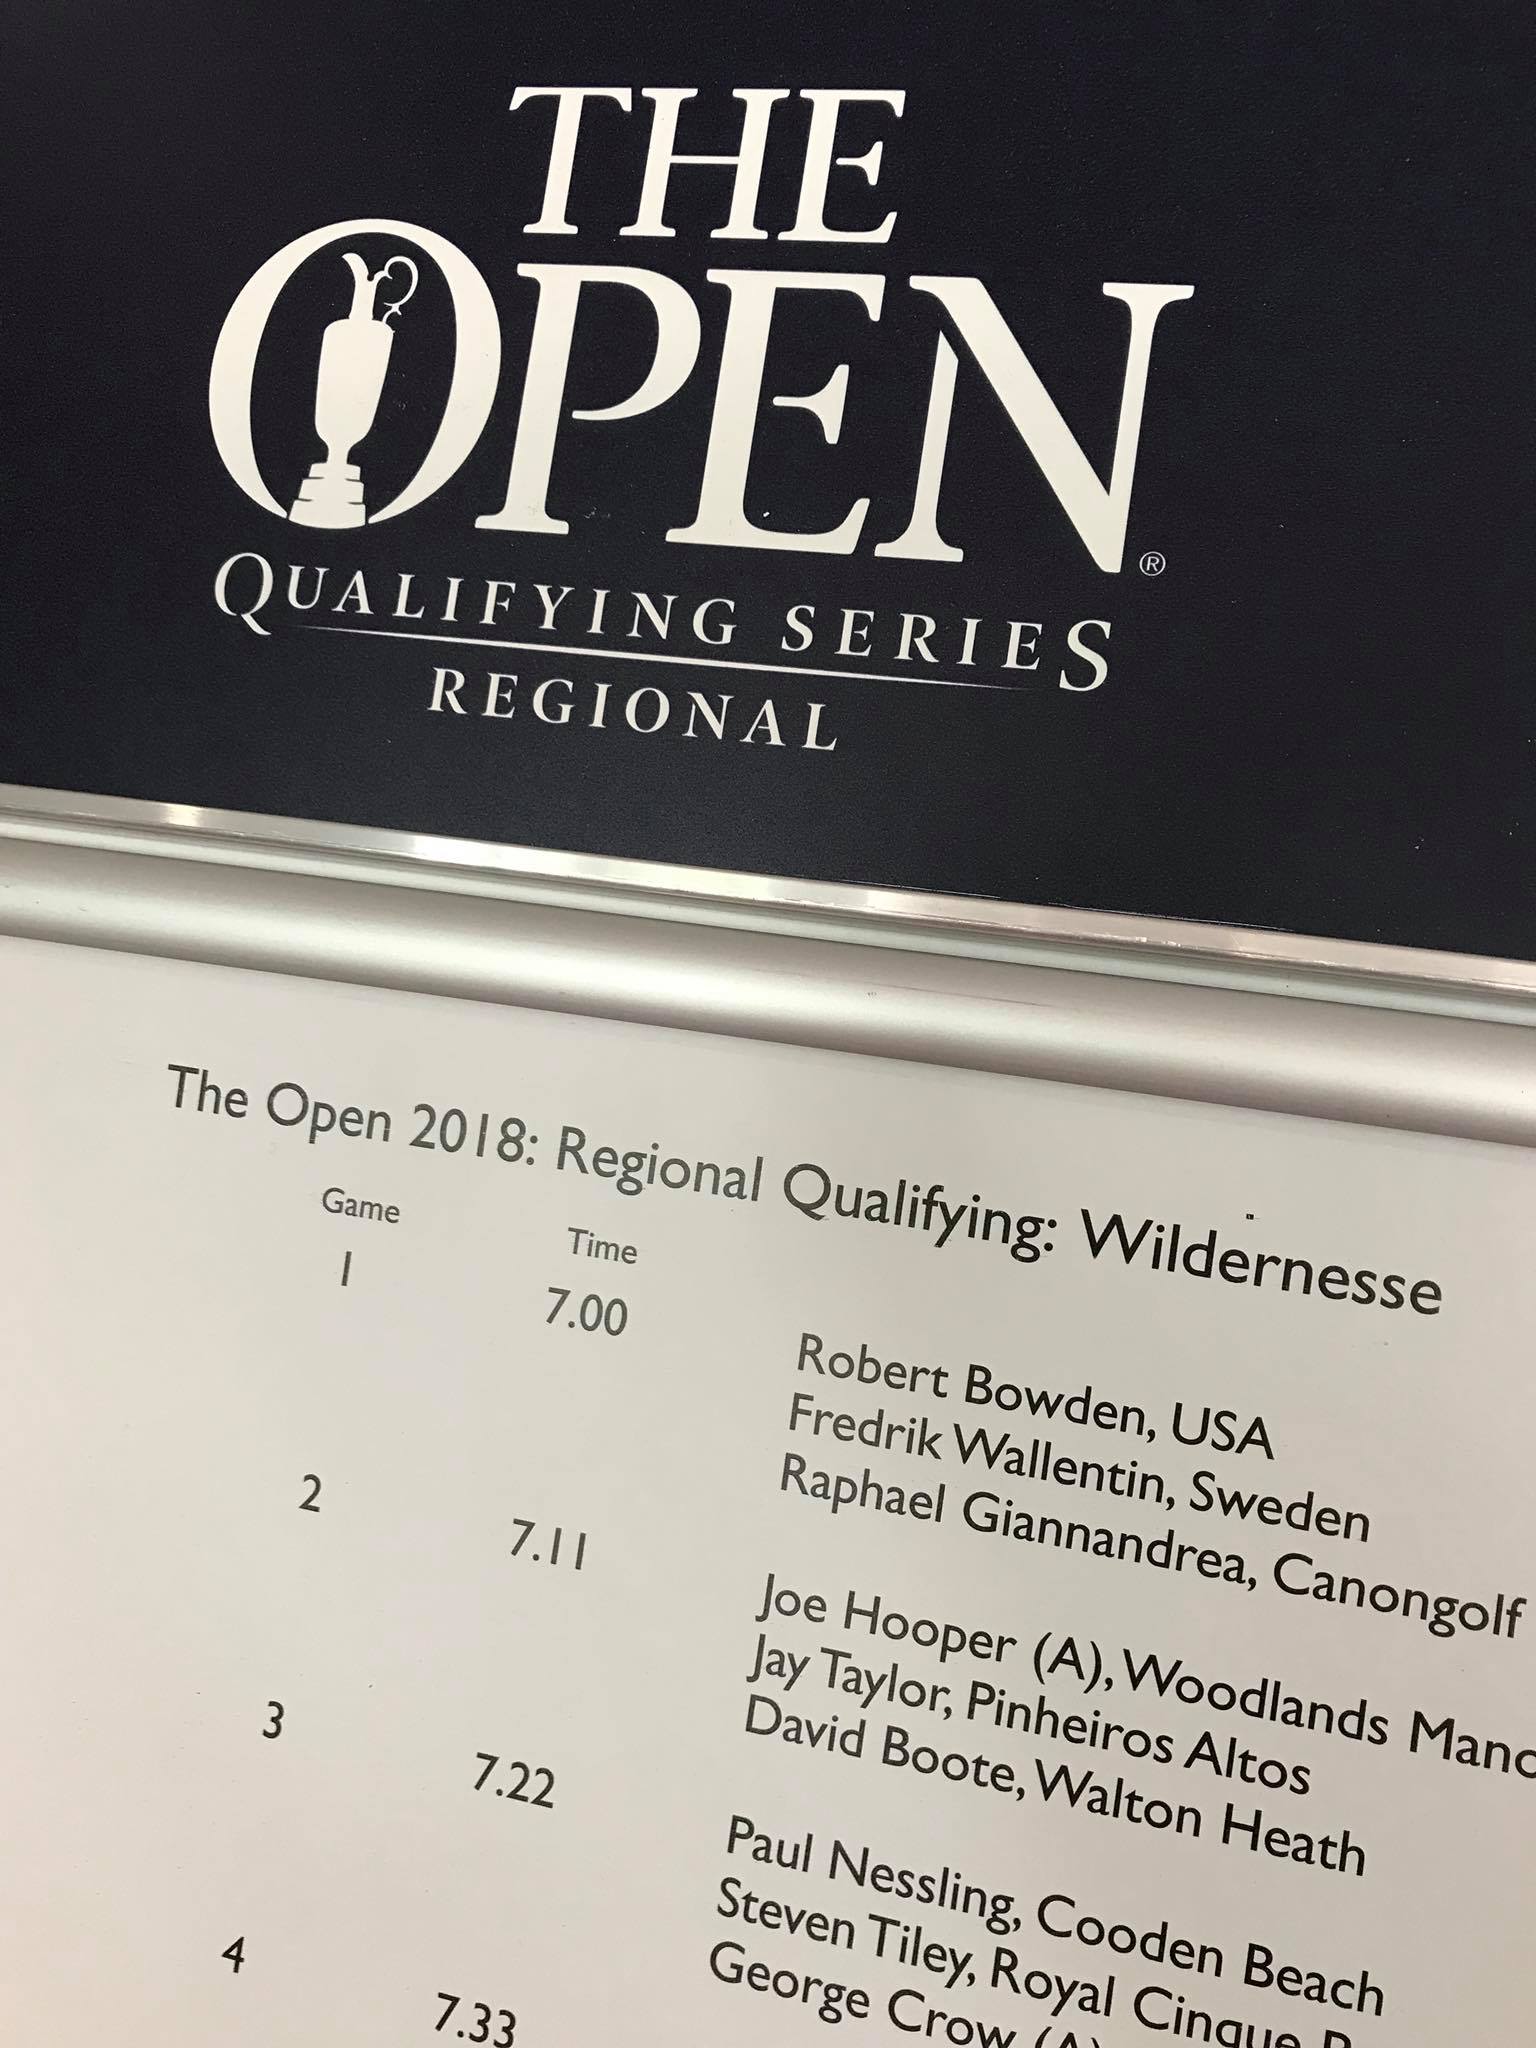 Jaacob Bowden leads off all competitors at the 2018 qualifying for The Open